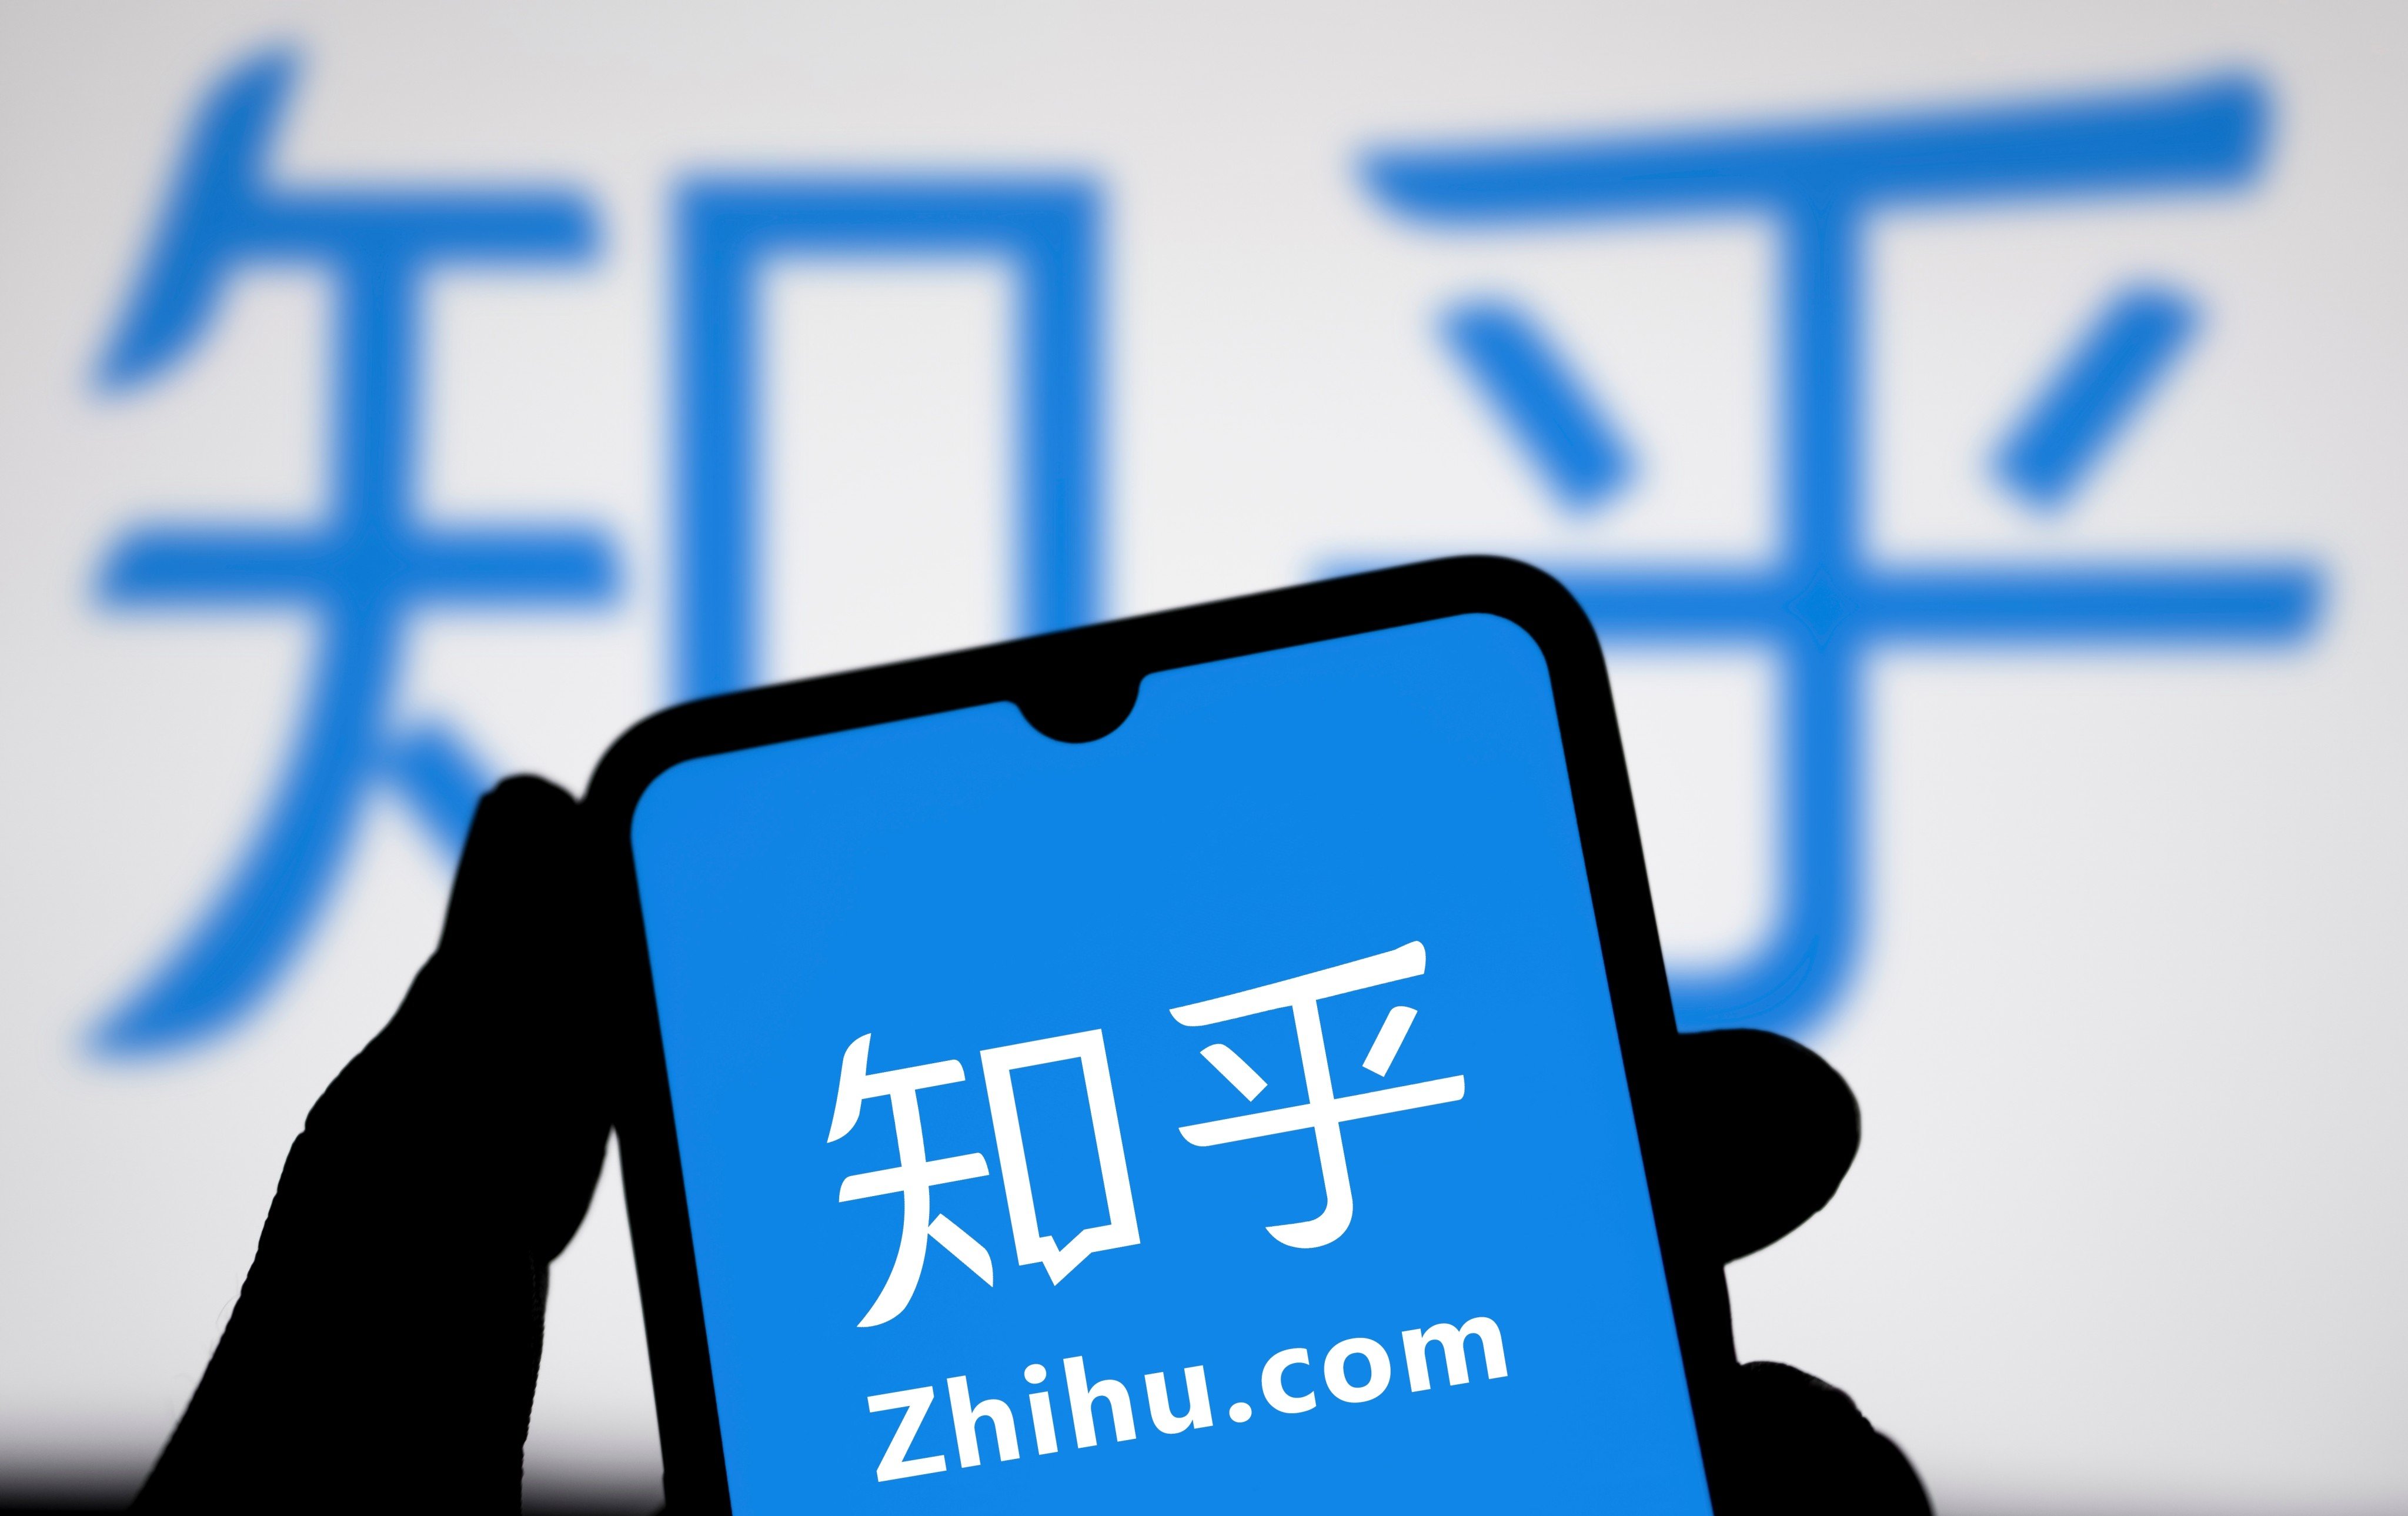 Zhihu has joined the ranks of Chinese technology companies that have enhanced their online services via the power of generative artificial intelligence. Photo: Shuttterstock